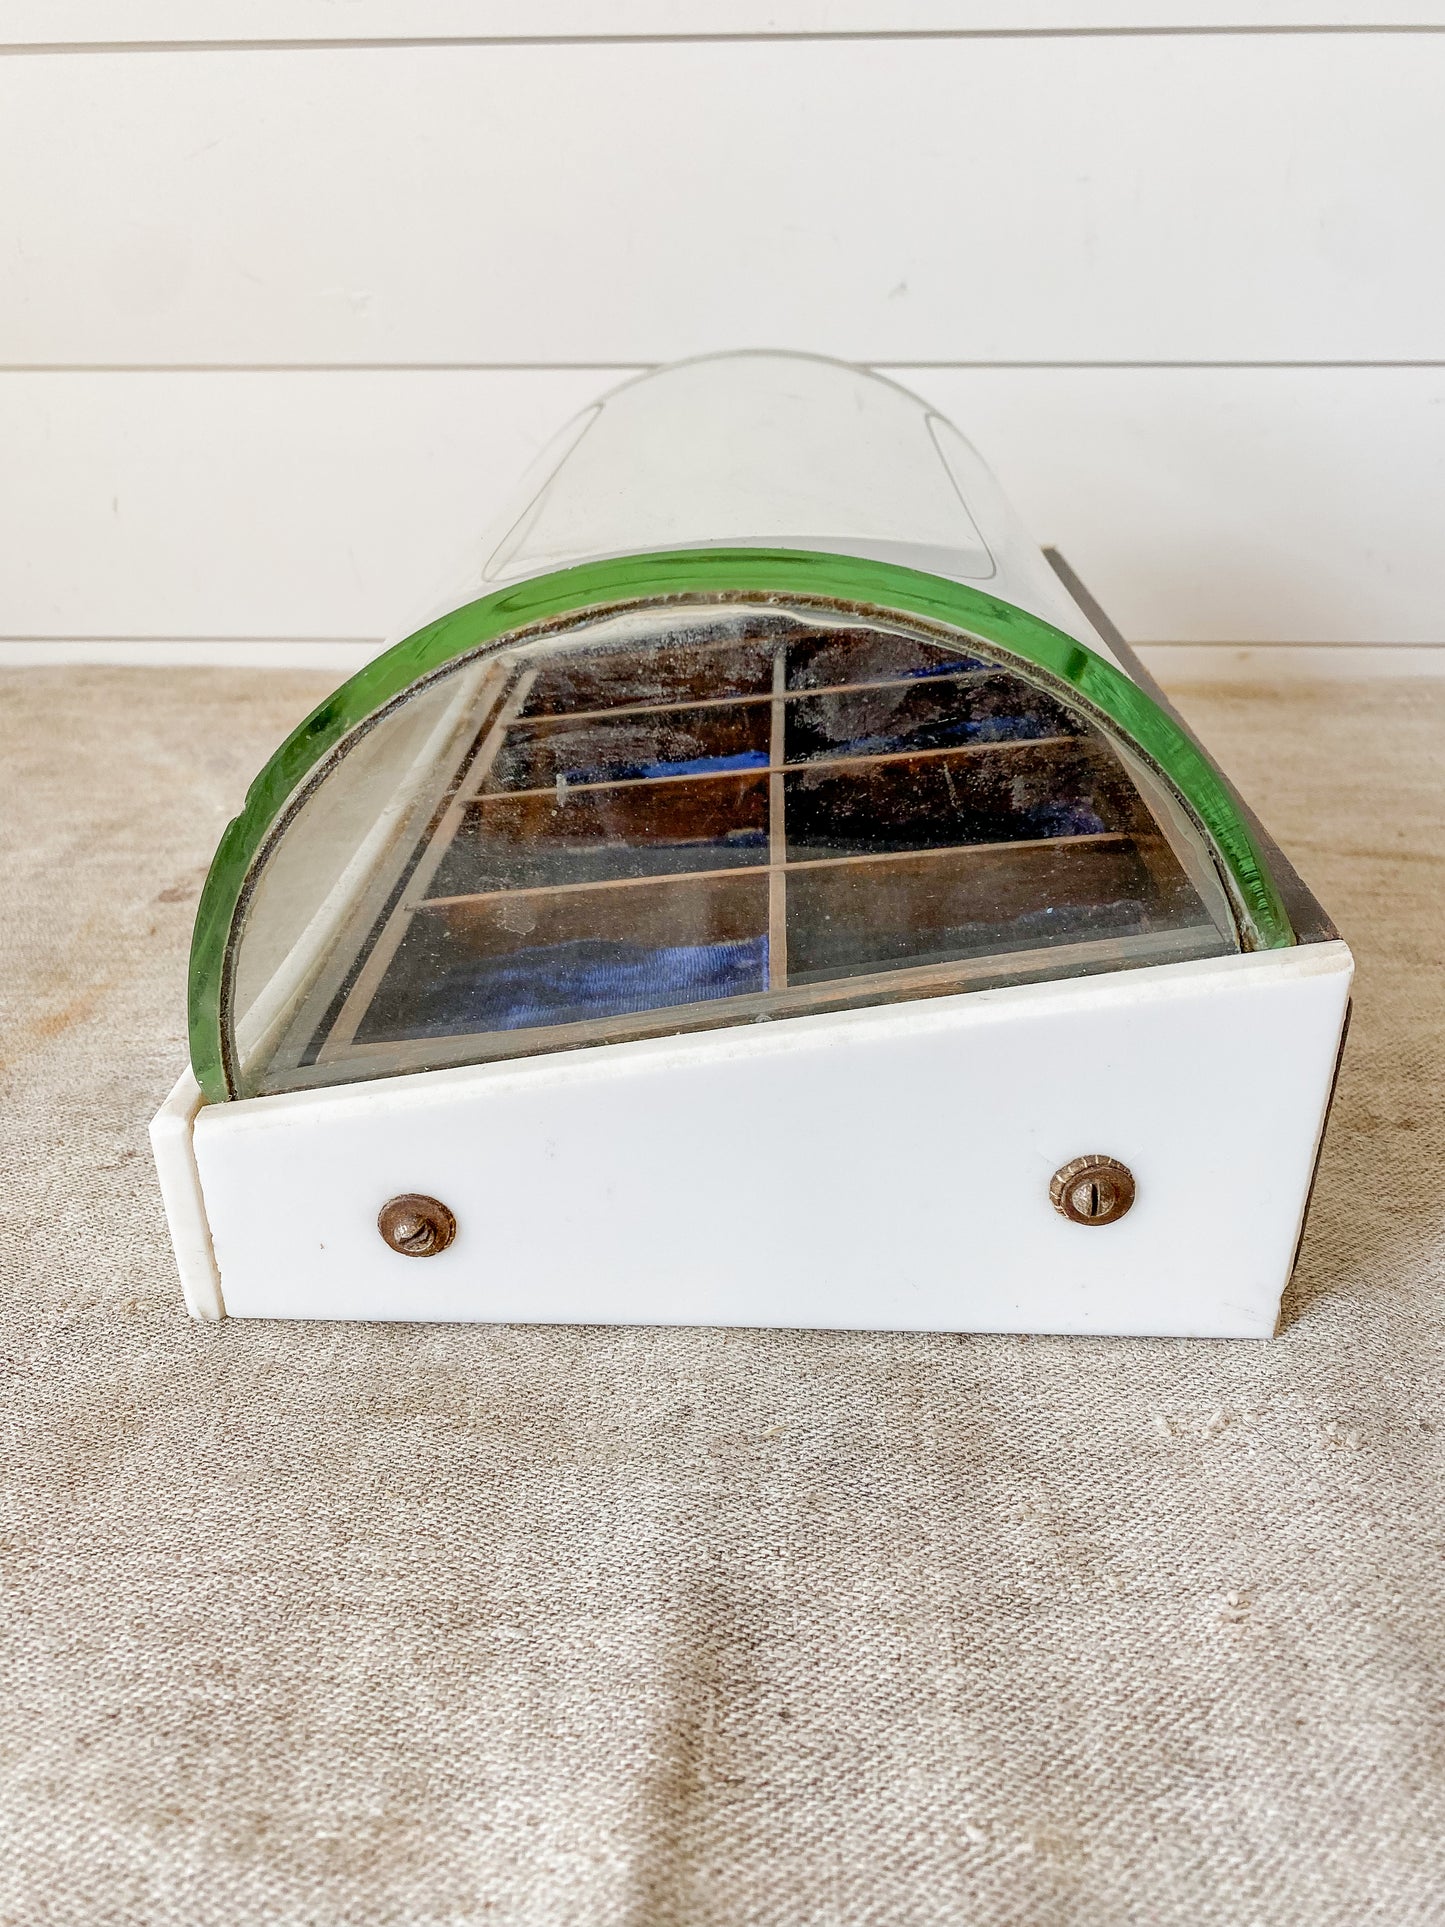 Antique Porcelain and Curved Glass Collar Stud Display Case with Velvet Lined Compartments, c1910